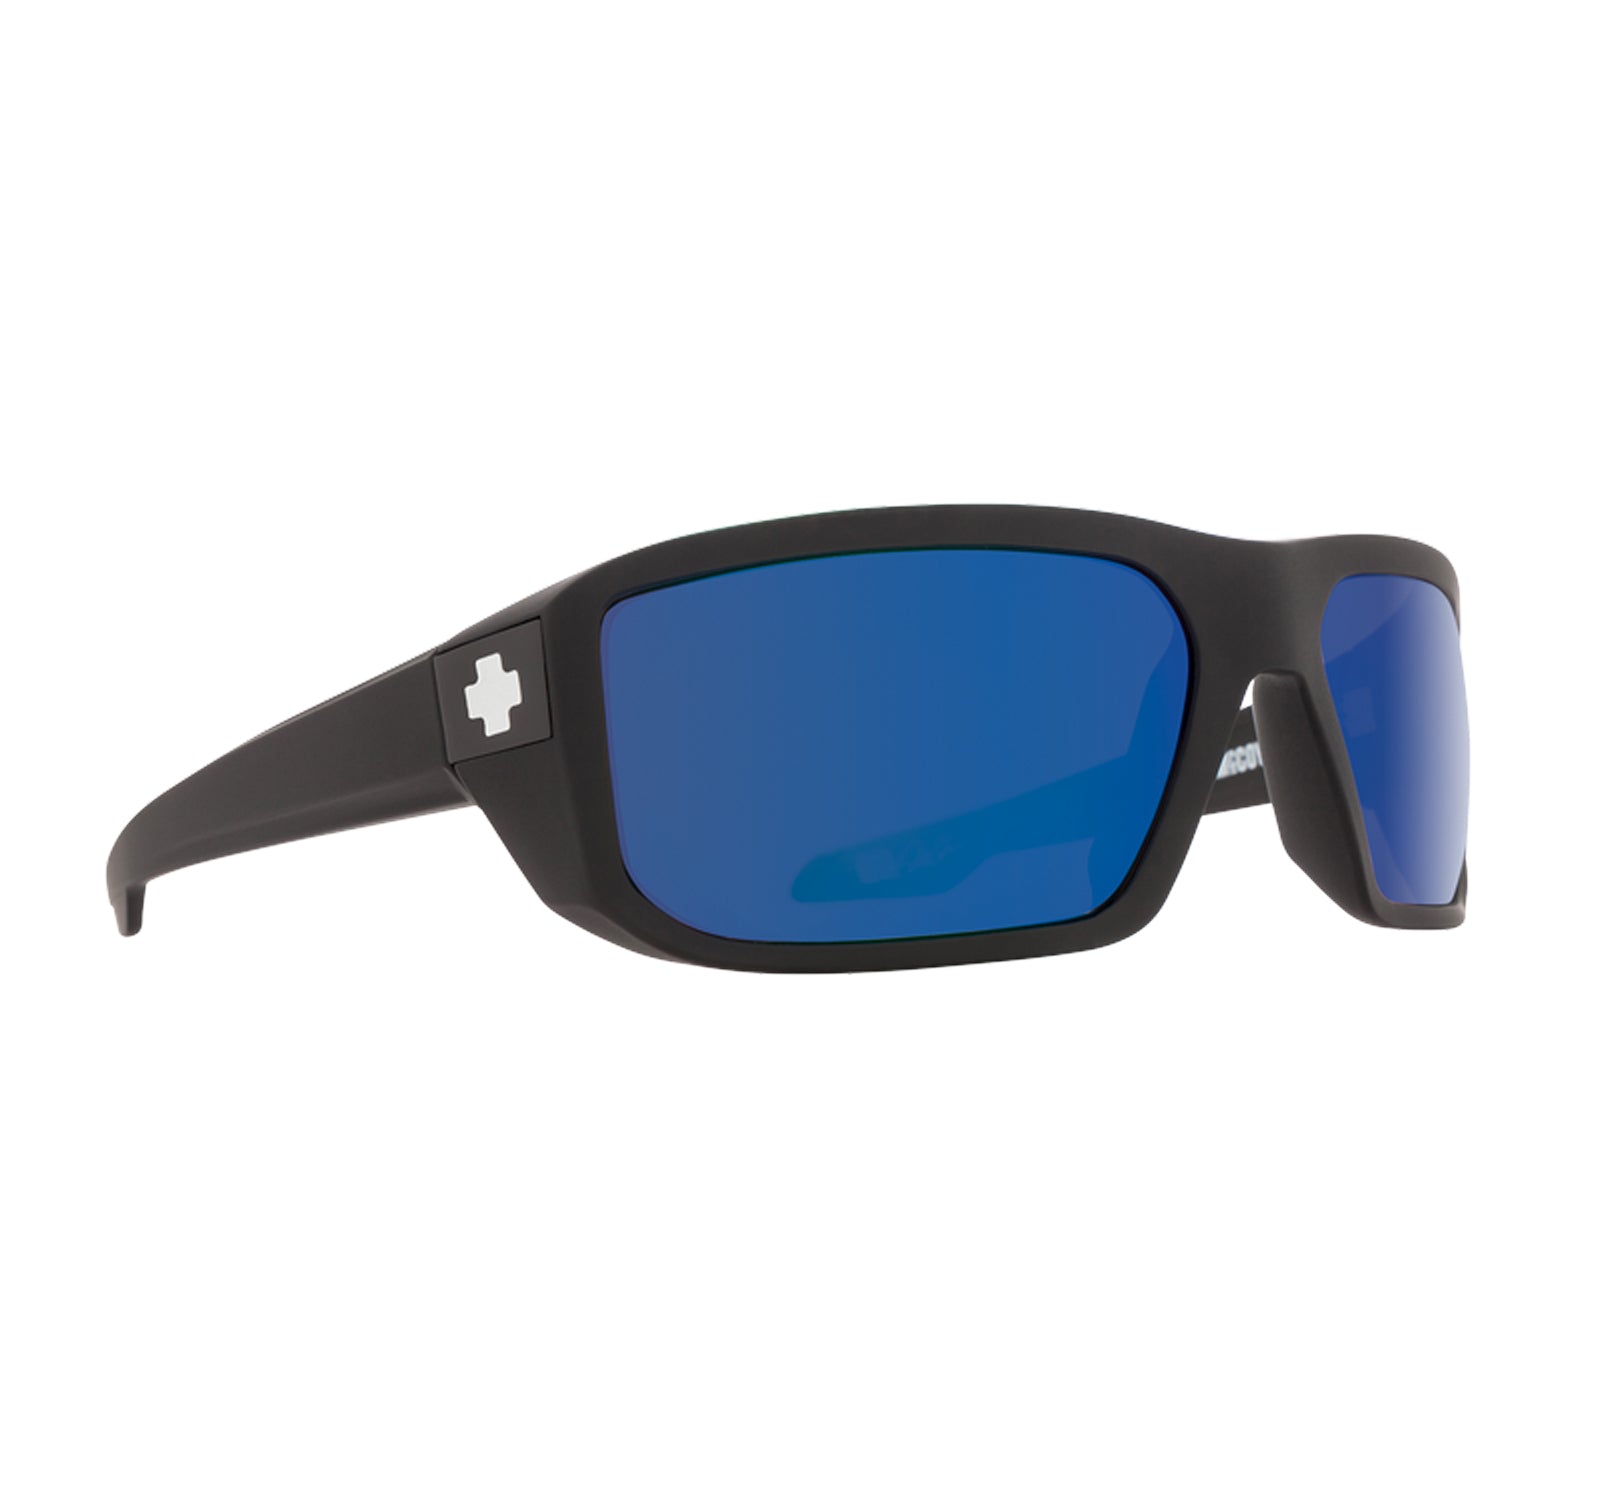 Men's Sunglasses Tagged spy - Surf Station Store